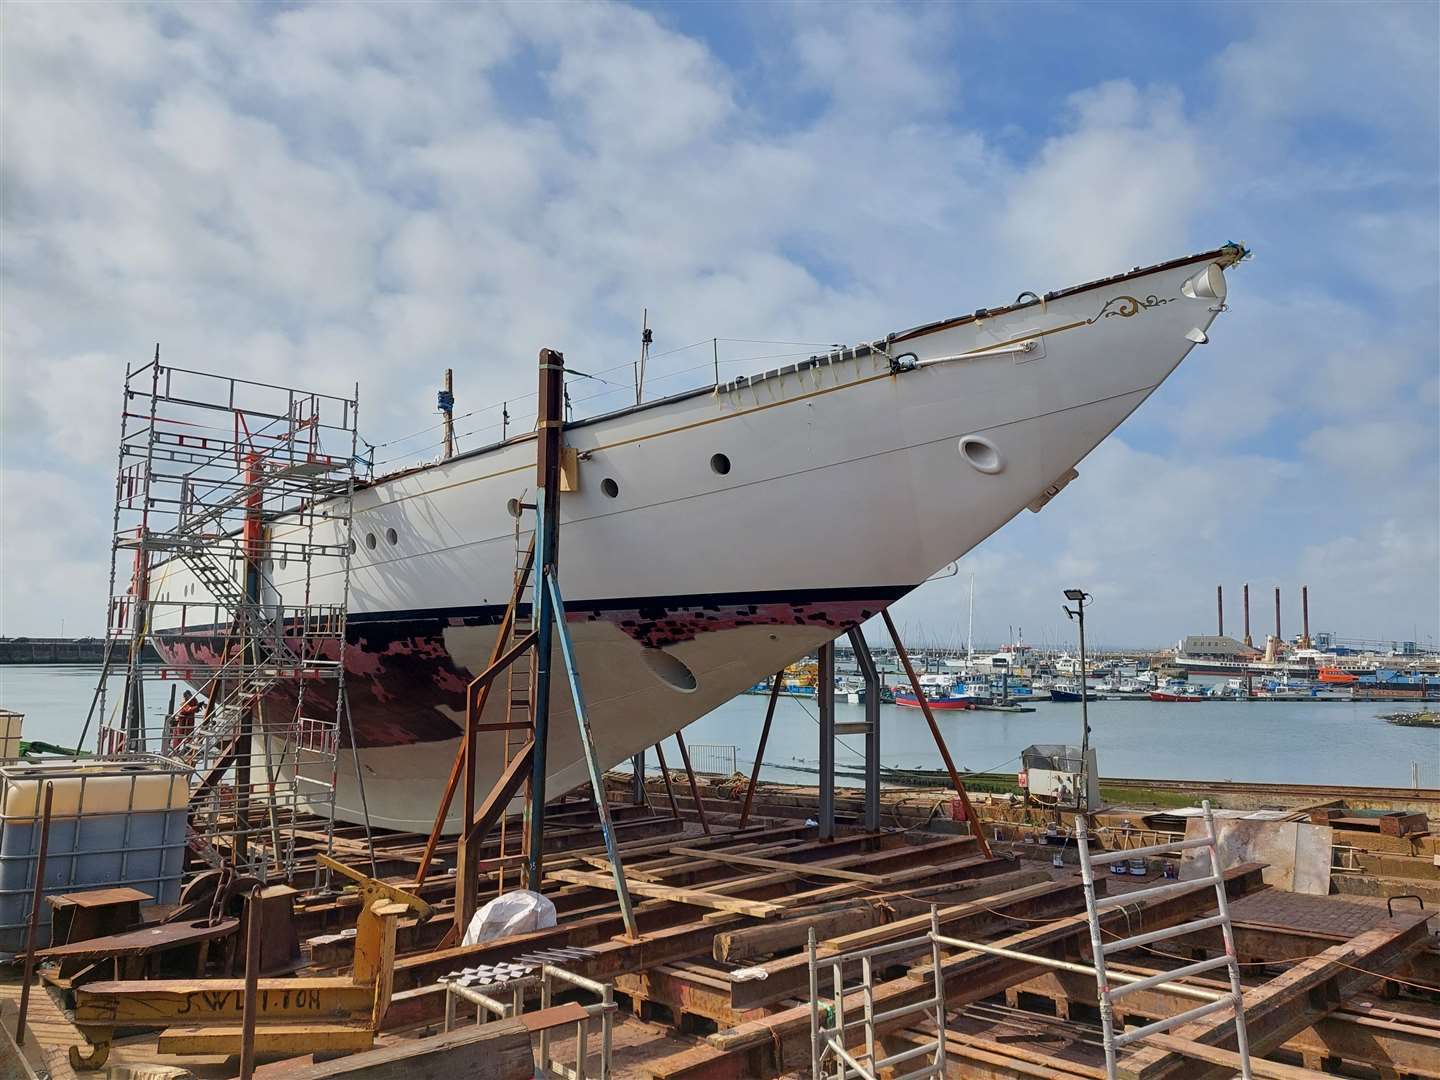 Work was carried out in Ramsgate Photo: Colin Matthews